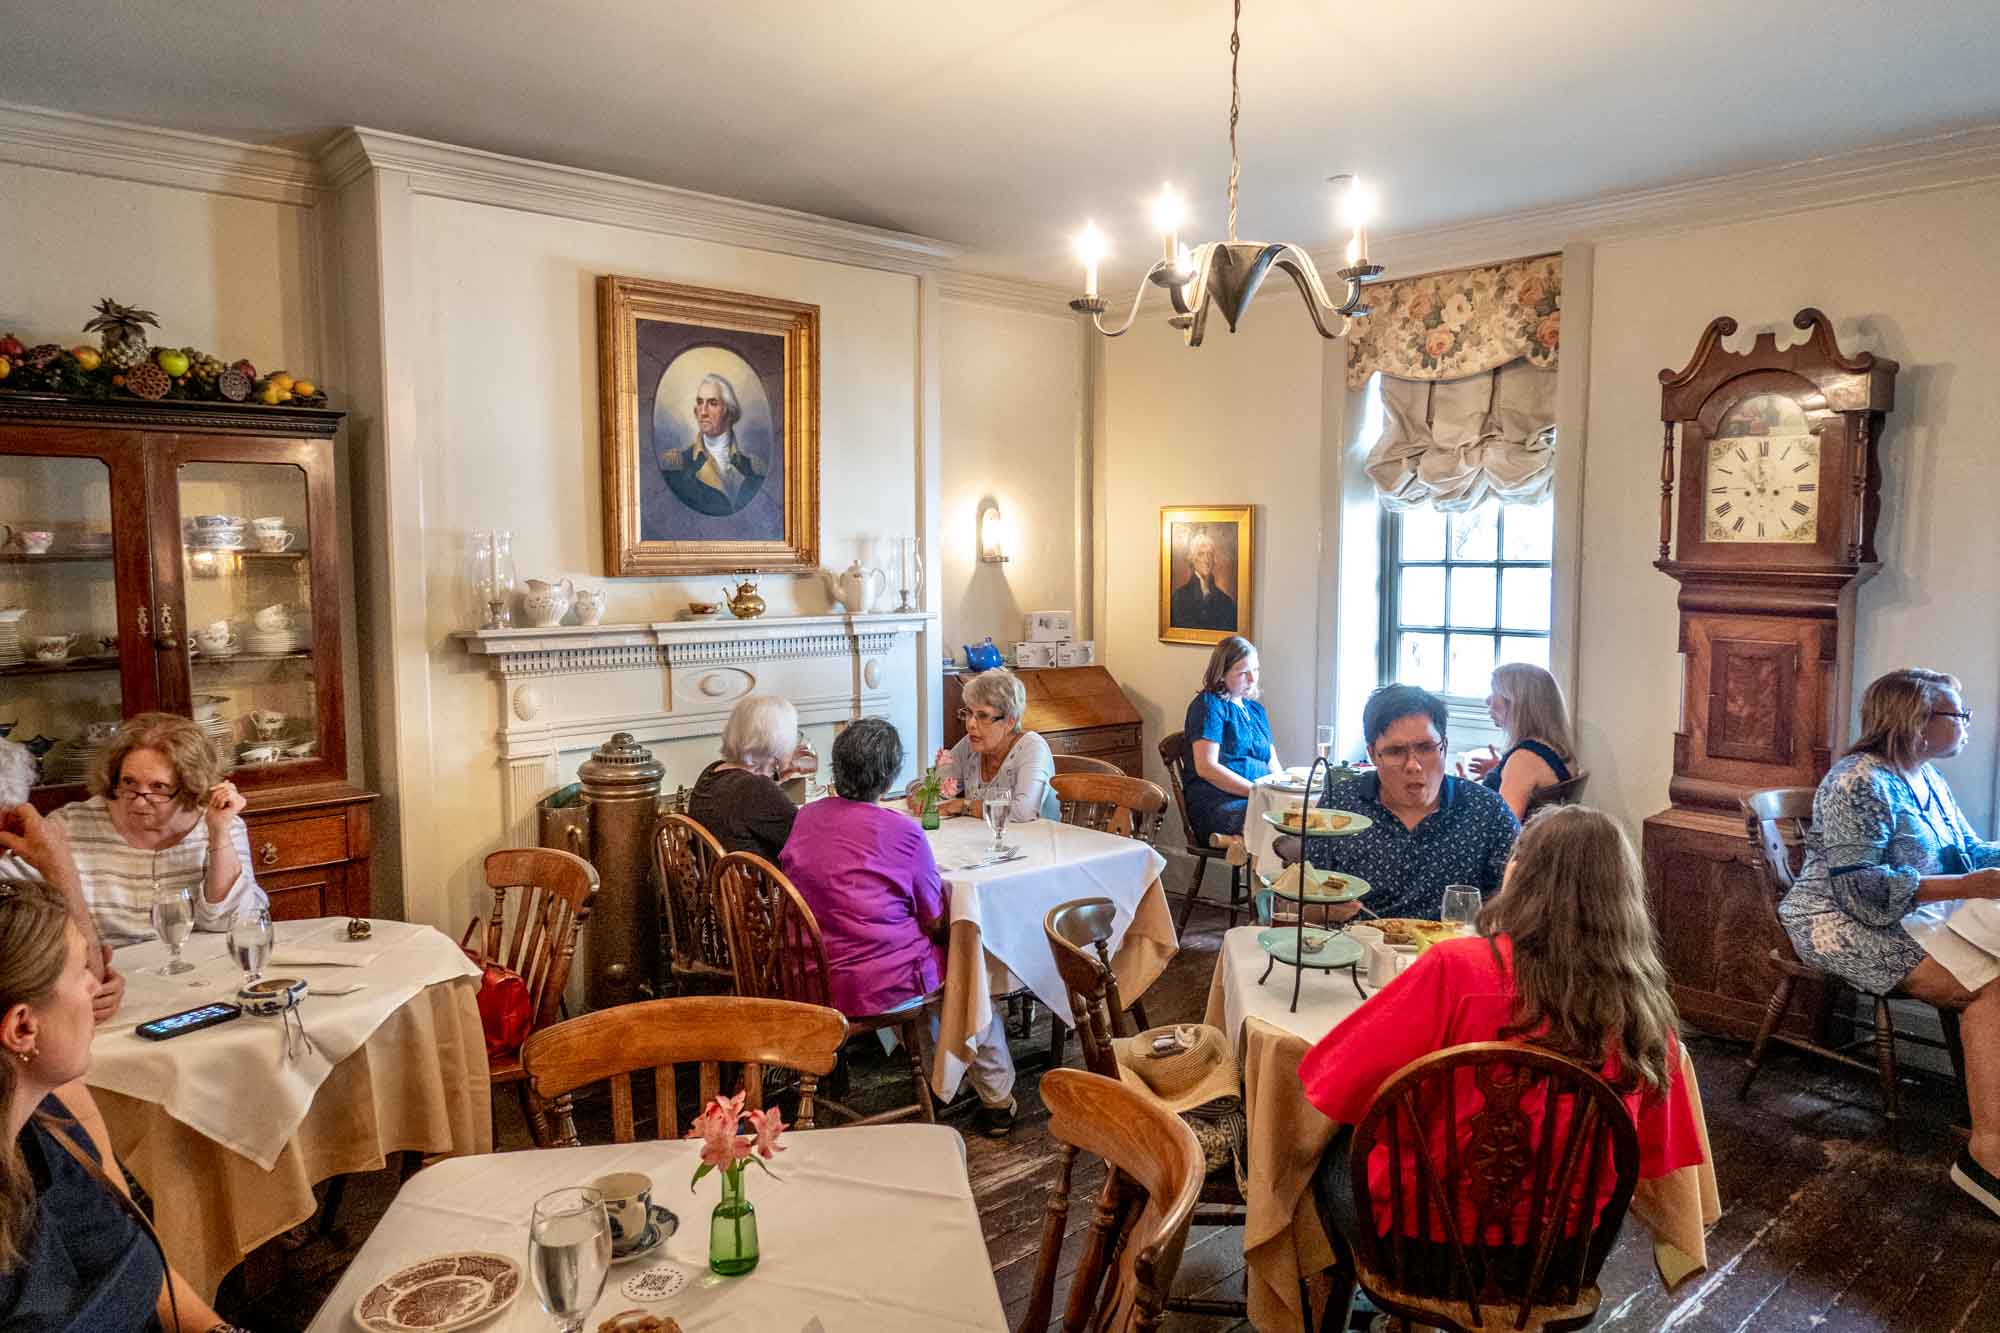 People eating at tables in a Colonial-style dining room with a portrait of George Washington on the wall.